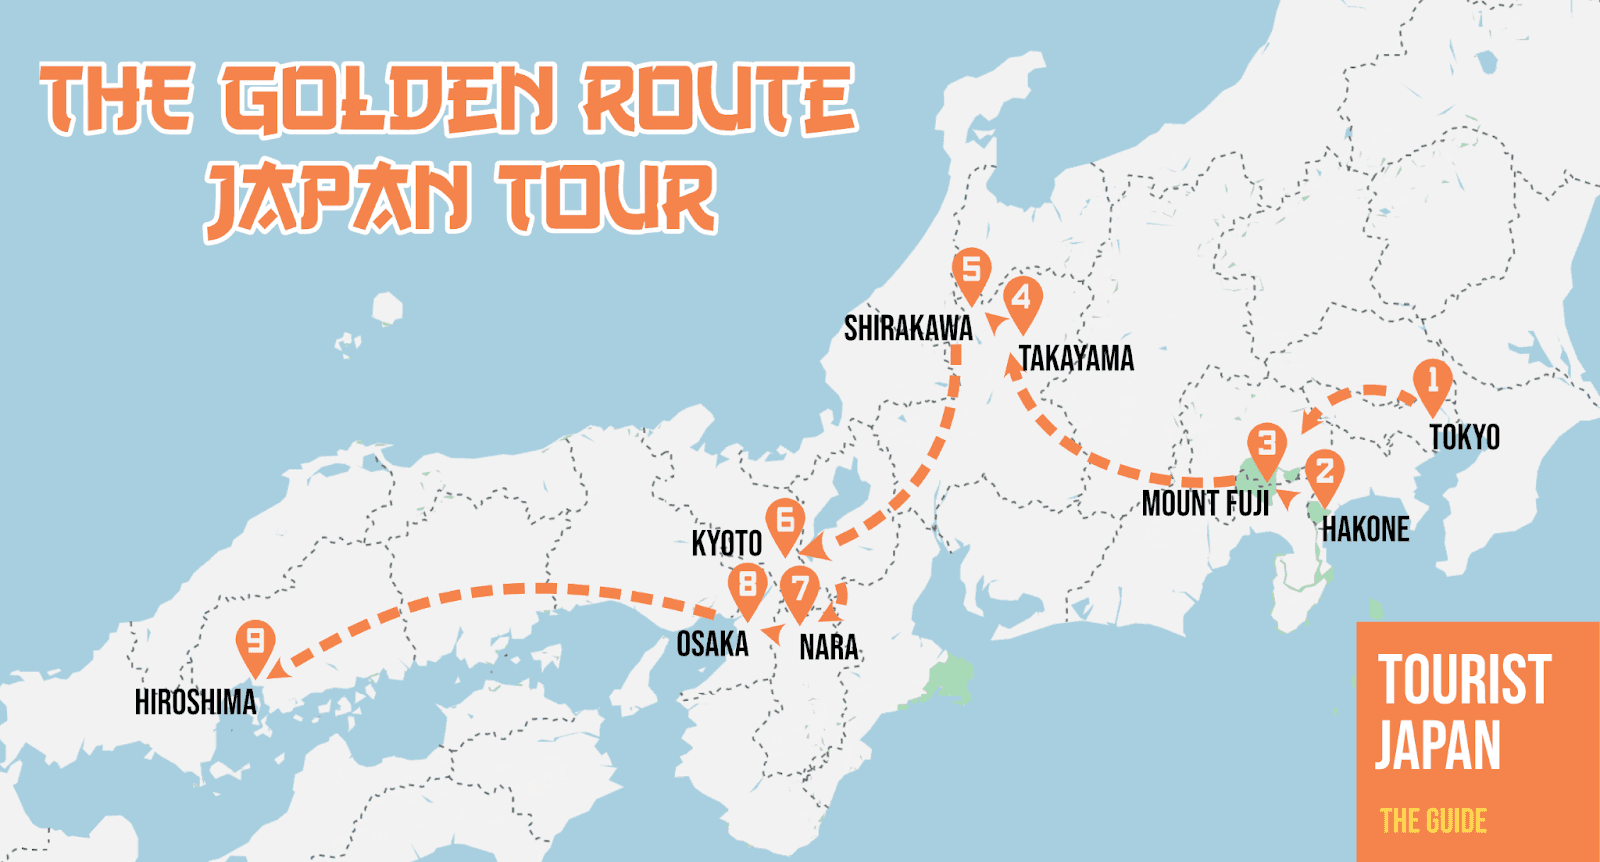 The Golden Route of Japan